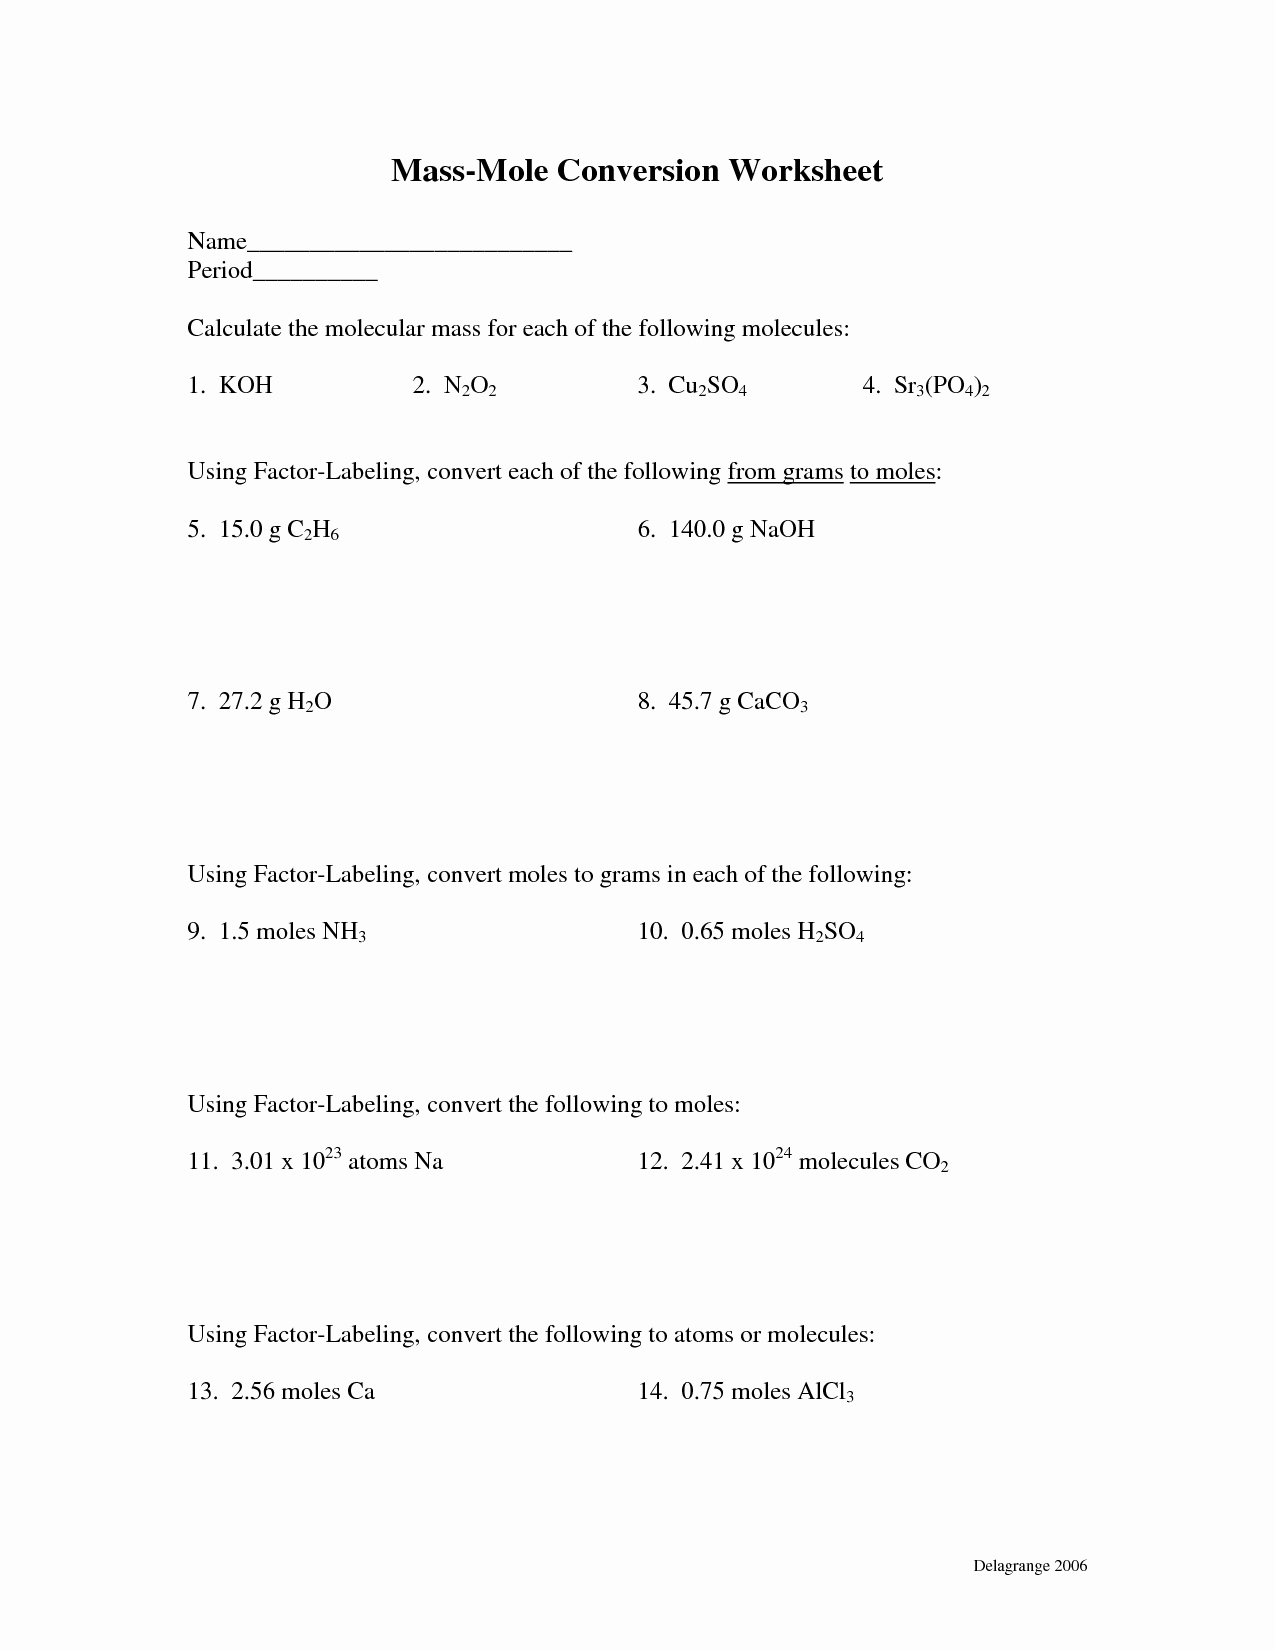 Molar Conversion Worksheet Answers Awesome 10 Best Of Moles and Mass Worksheet Answers Moles